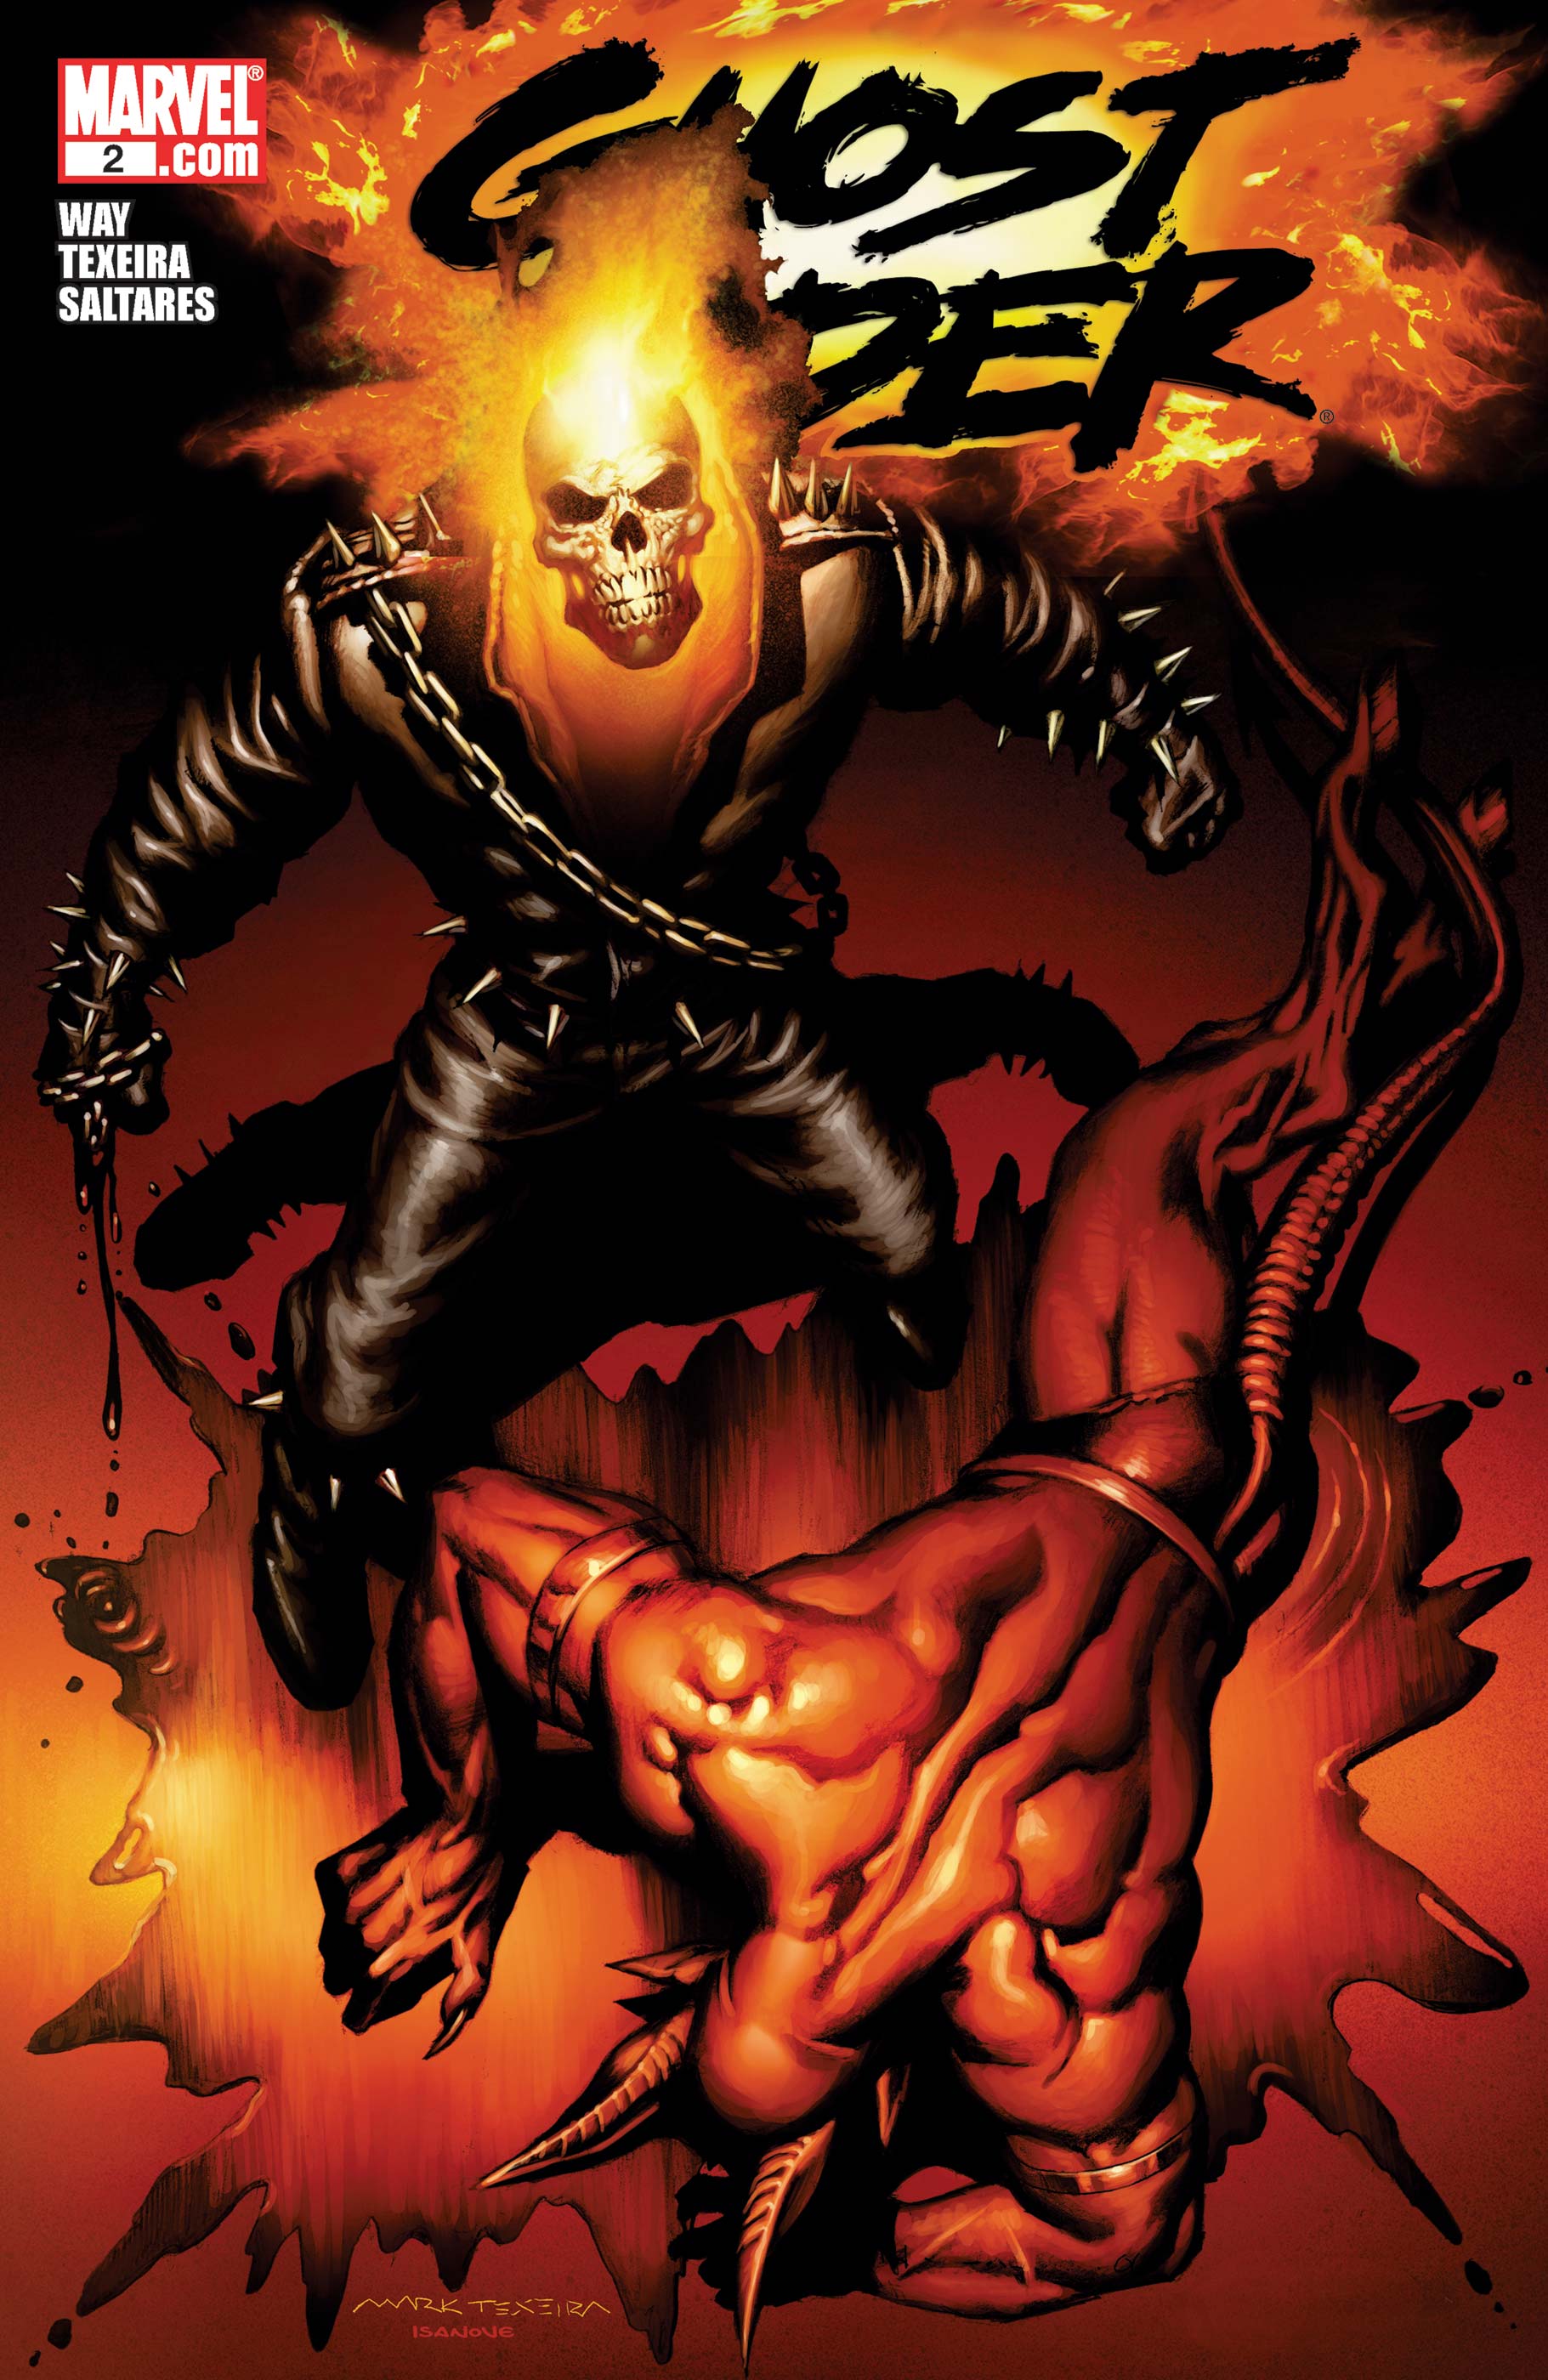 Cool Comic Art on X: Ghost Rider by Mark Texeira